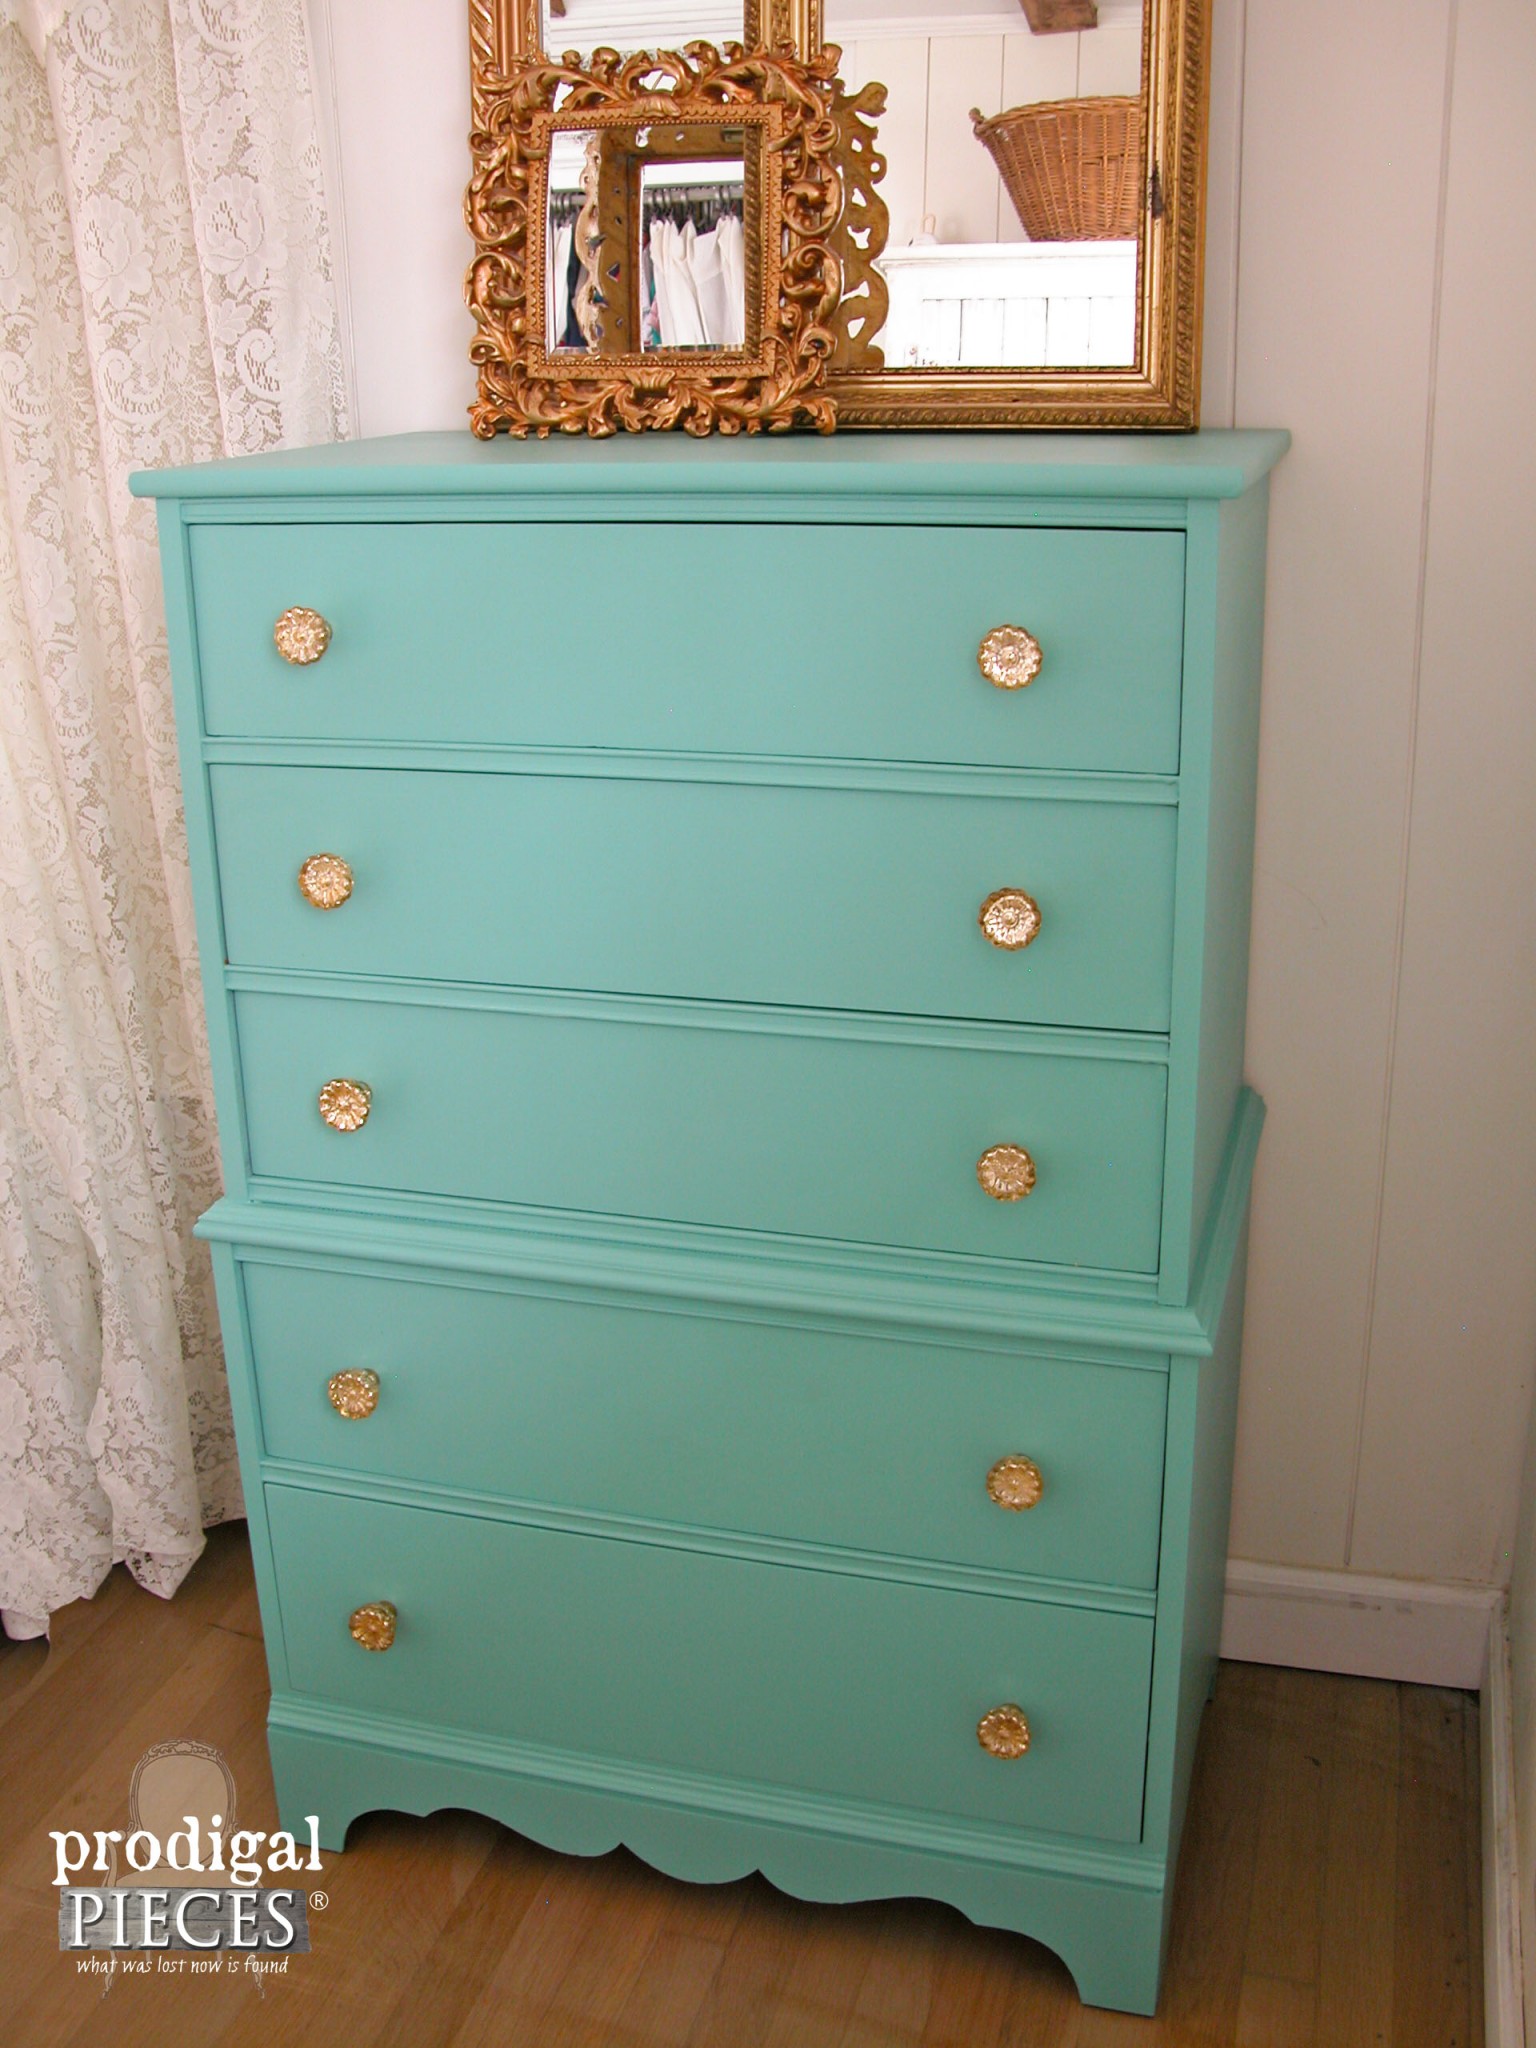 Gold Glass Pulls on Teal Painted Chest by Prodigal Pieces | www.prodigalpieces.com